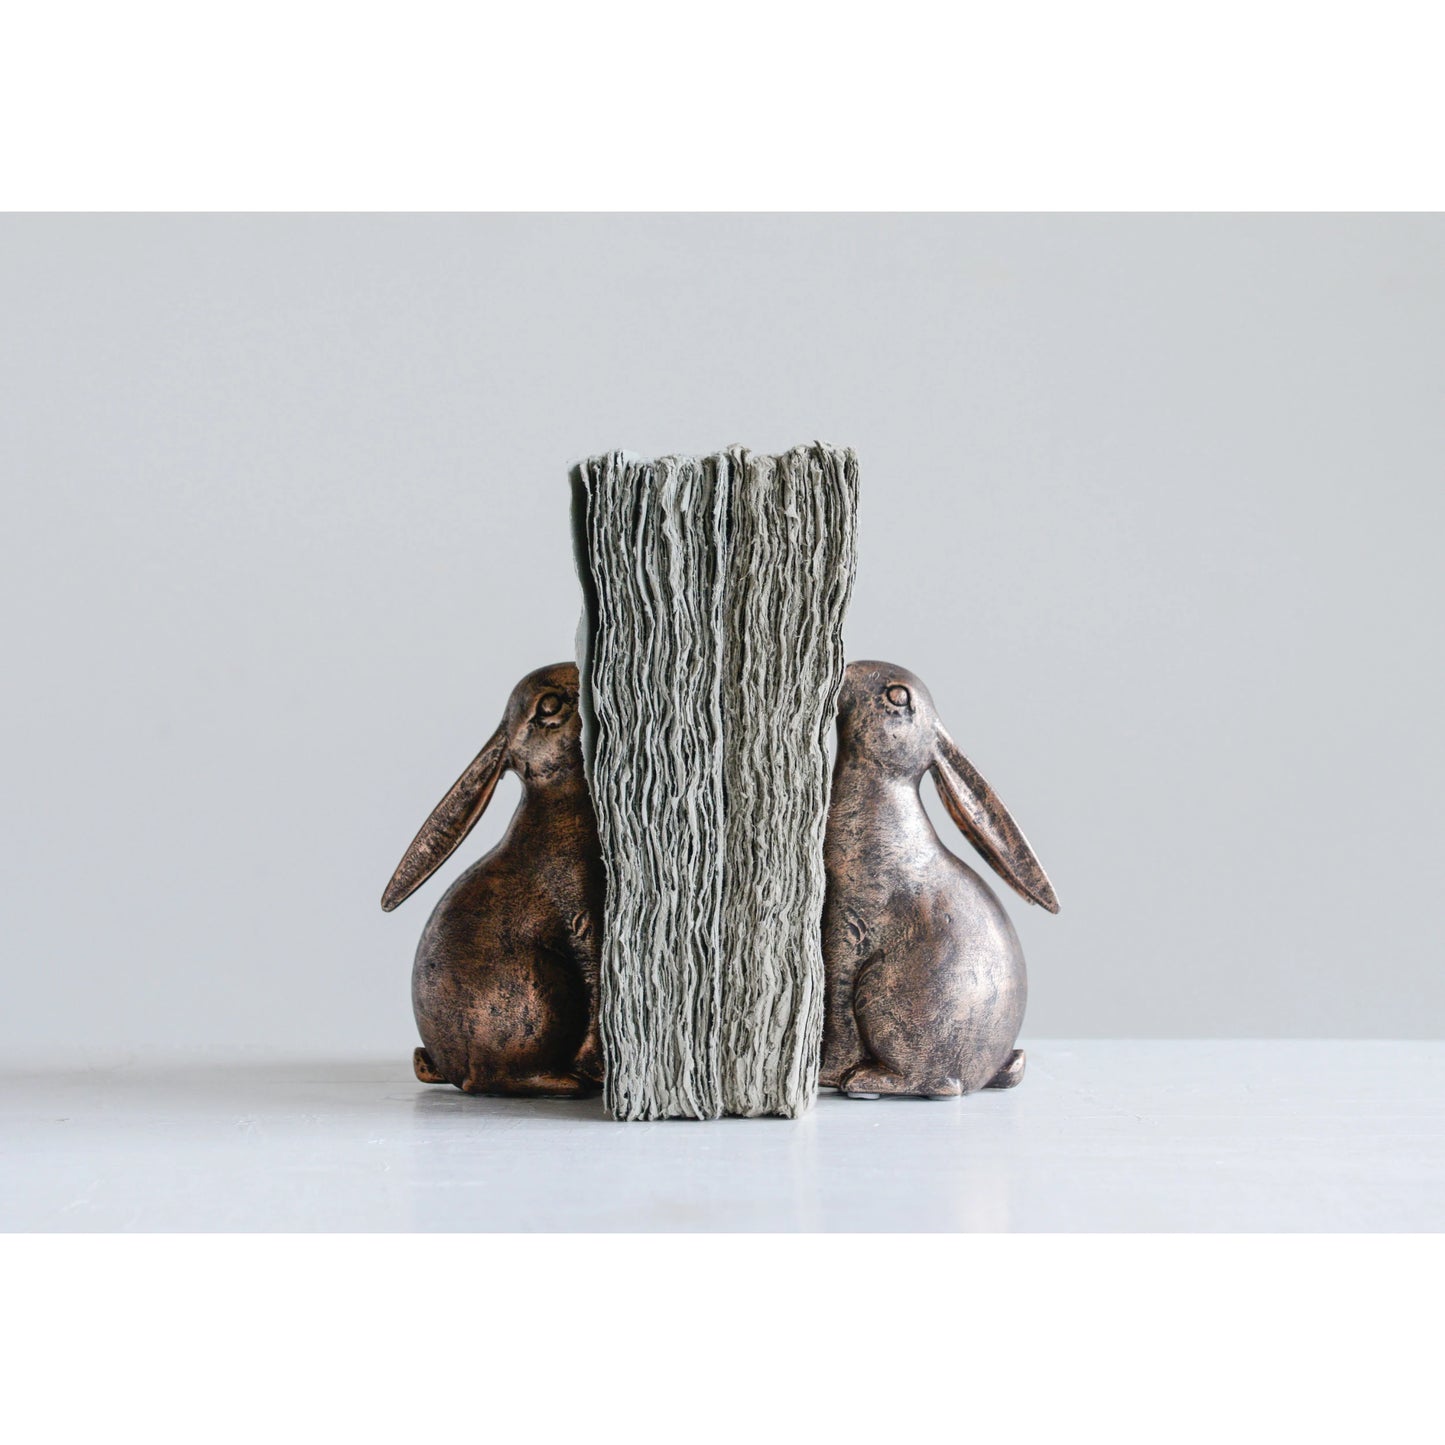 Bunny Bookends | Set of 2